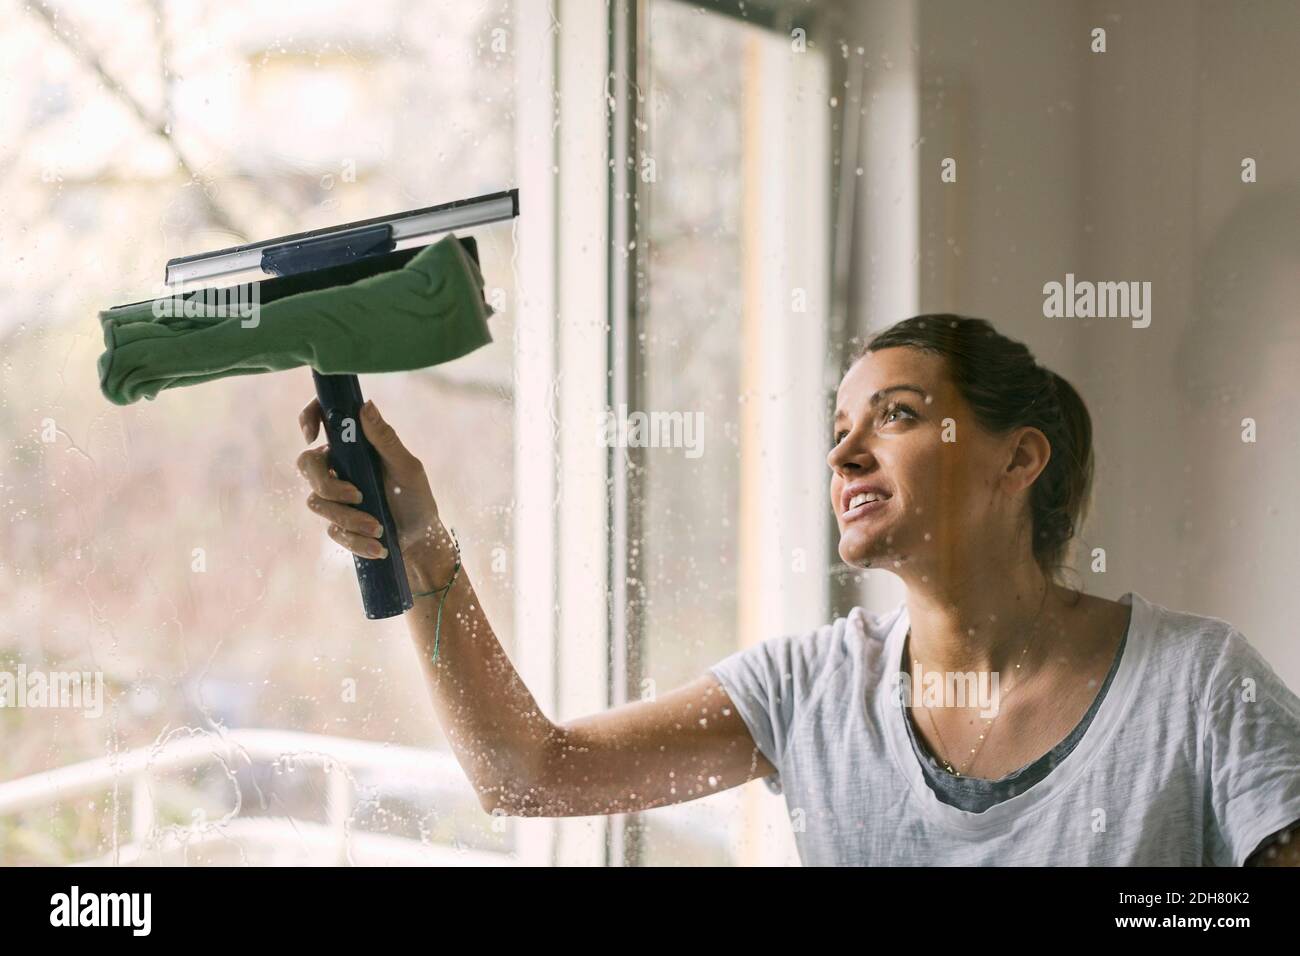 Woman cleaning glass window Stock Photo